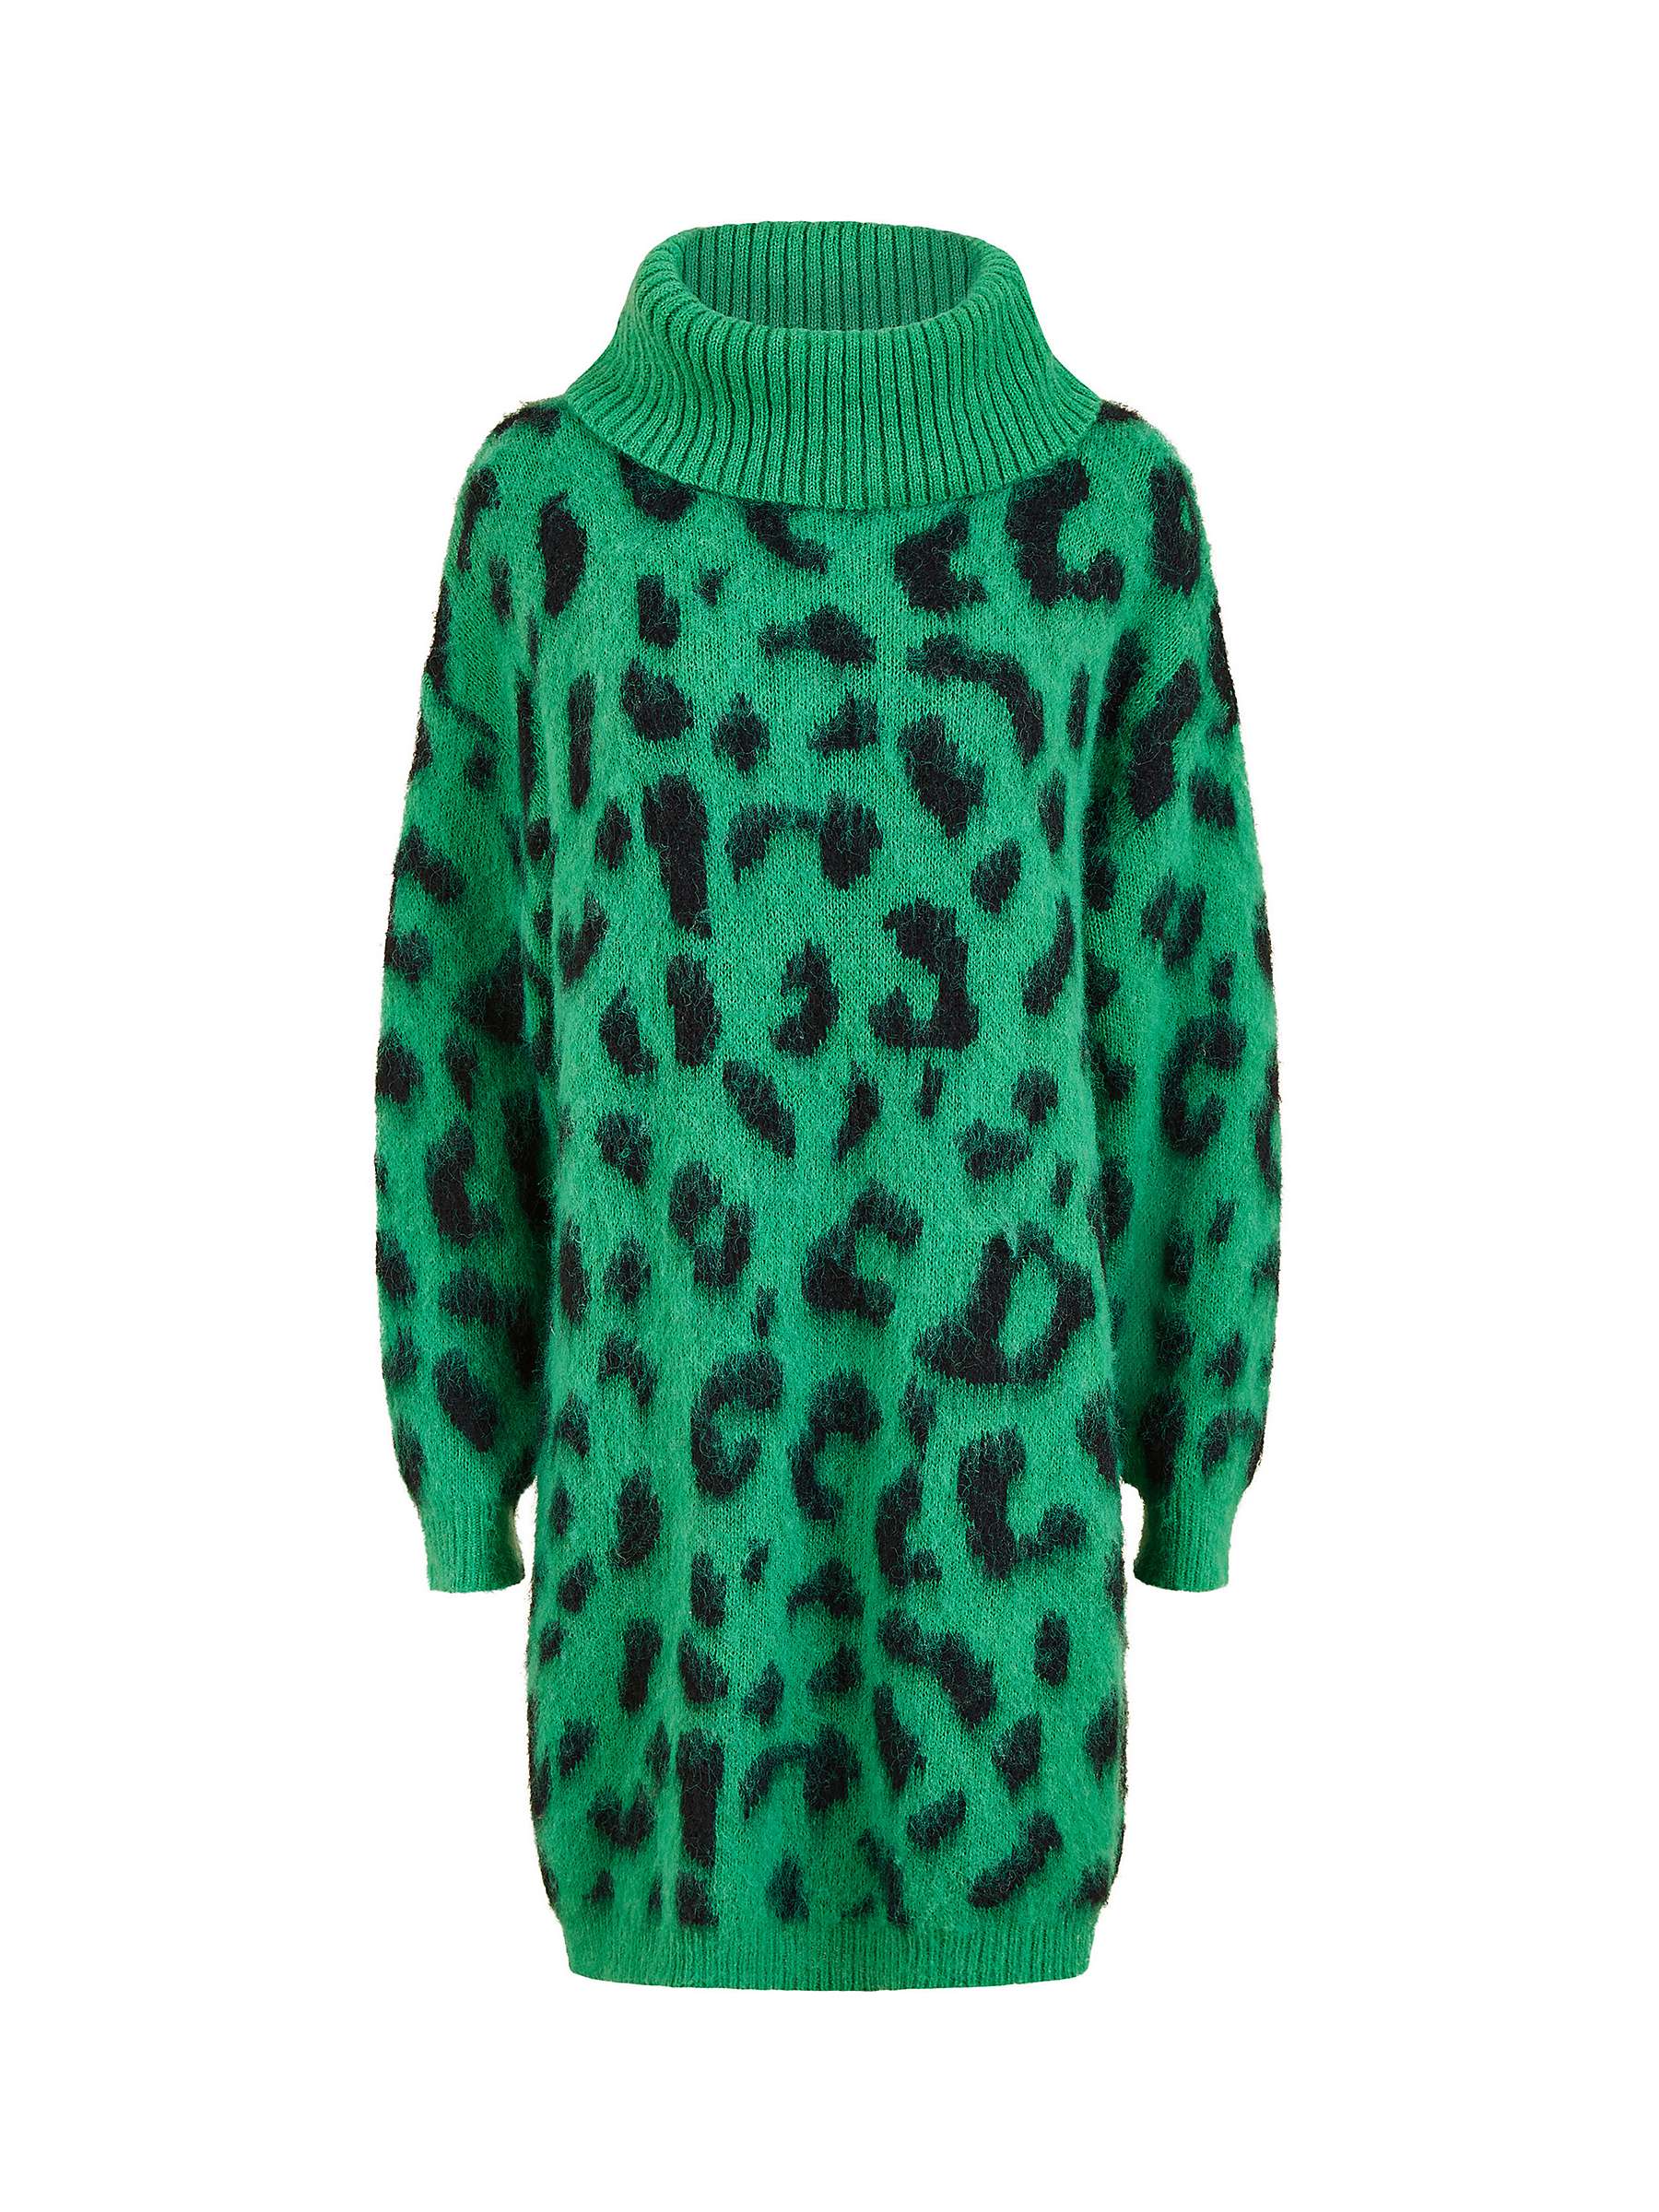 Buy Yumi Animal Roll Neck Knitted Dress, Green/Multi Online at johnlewis.com